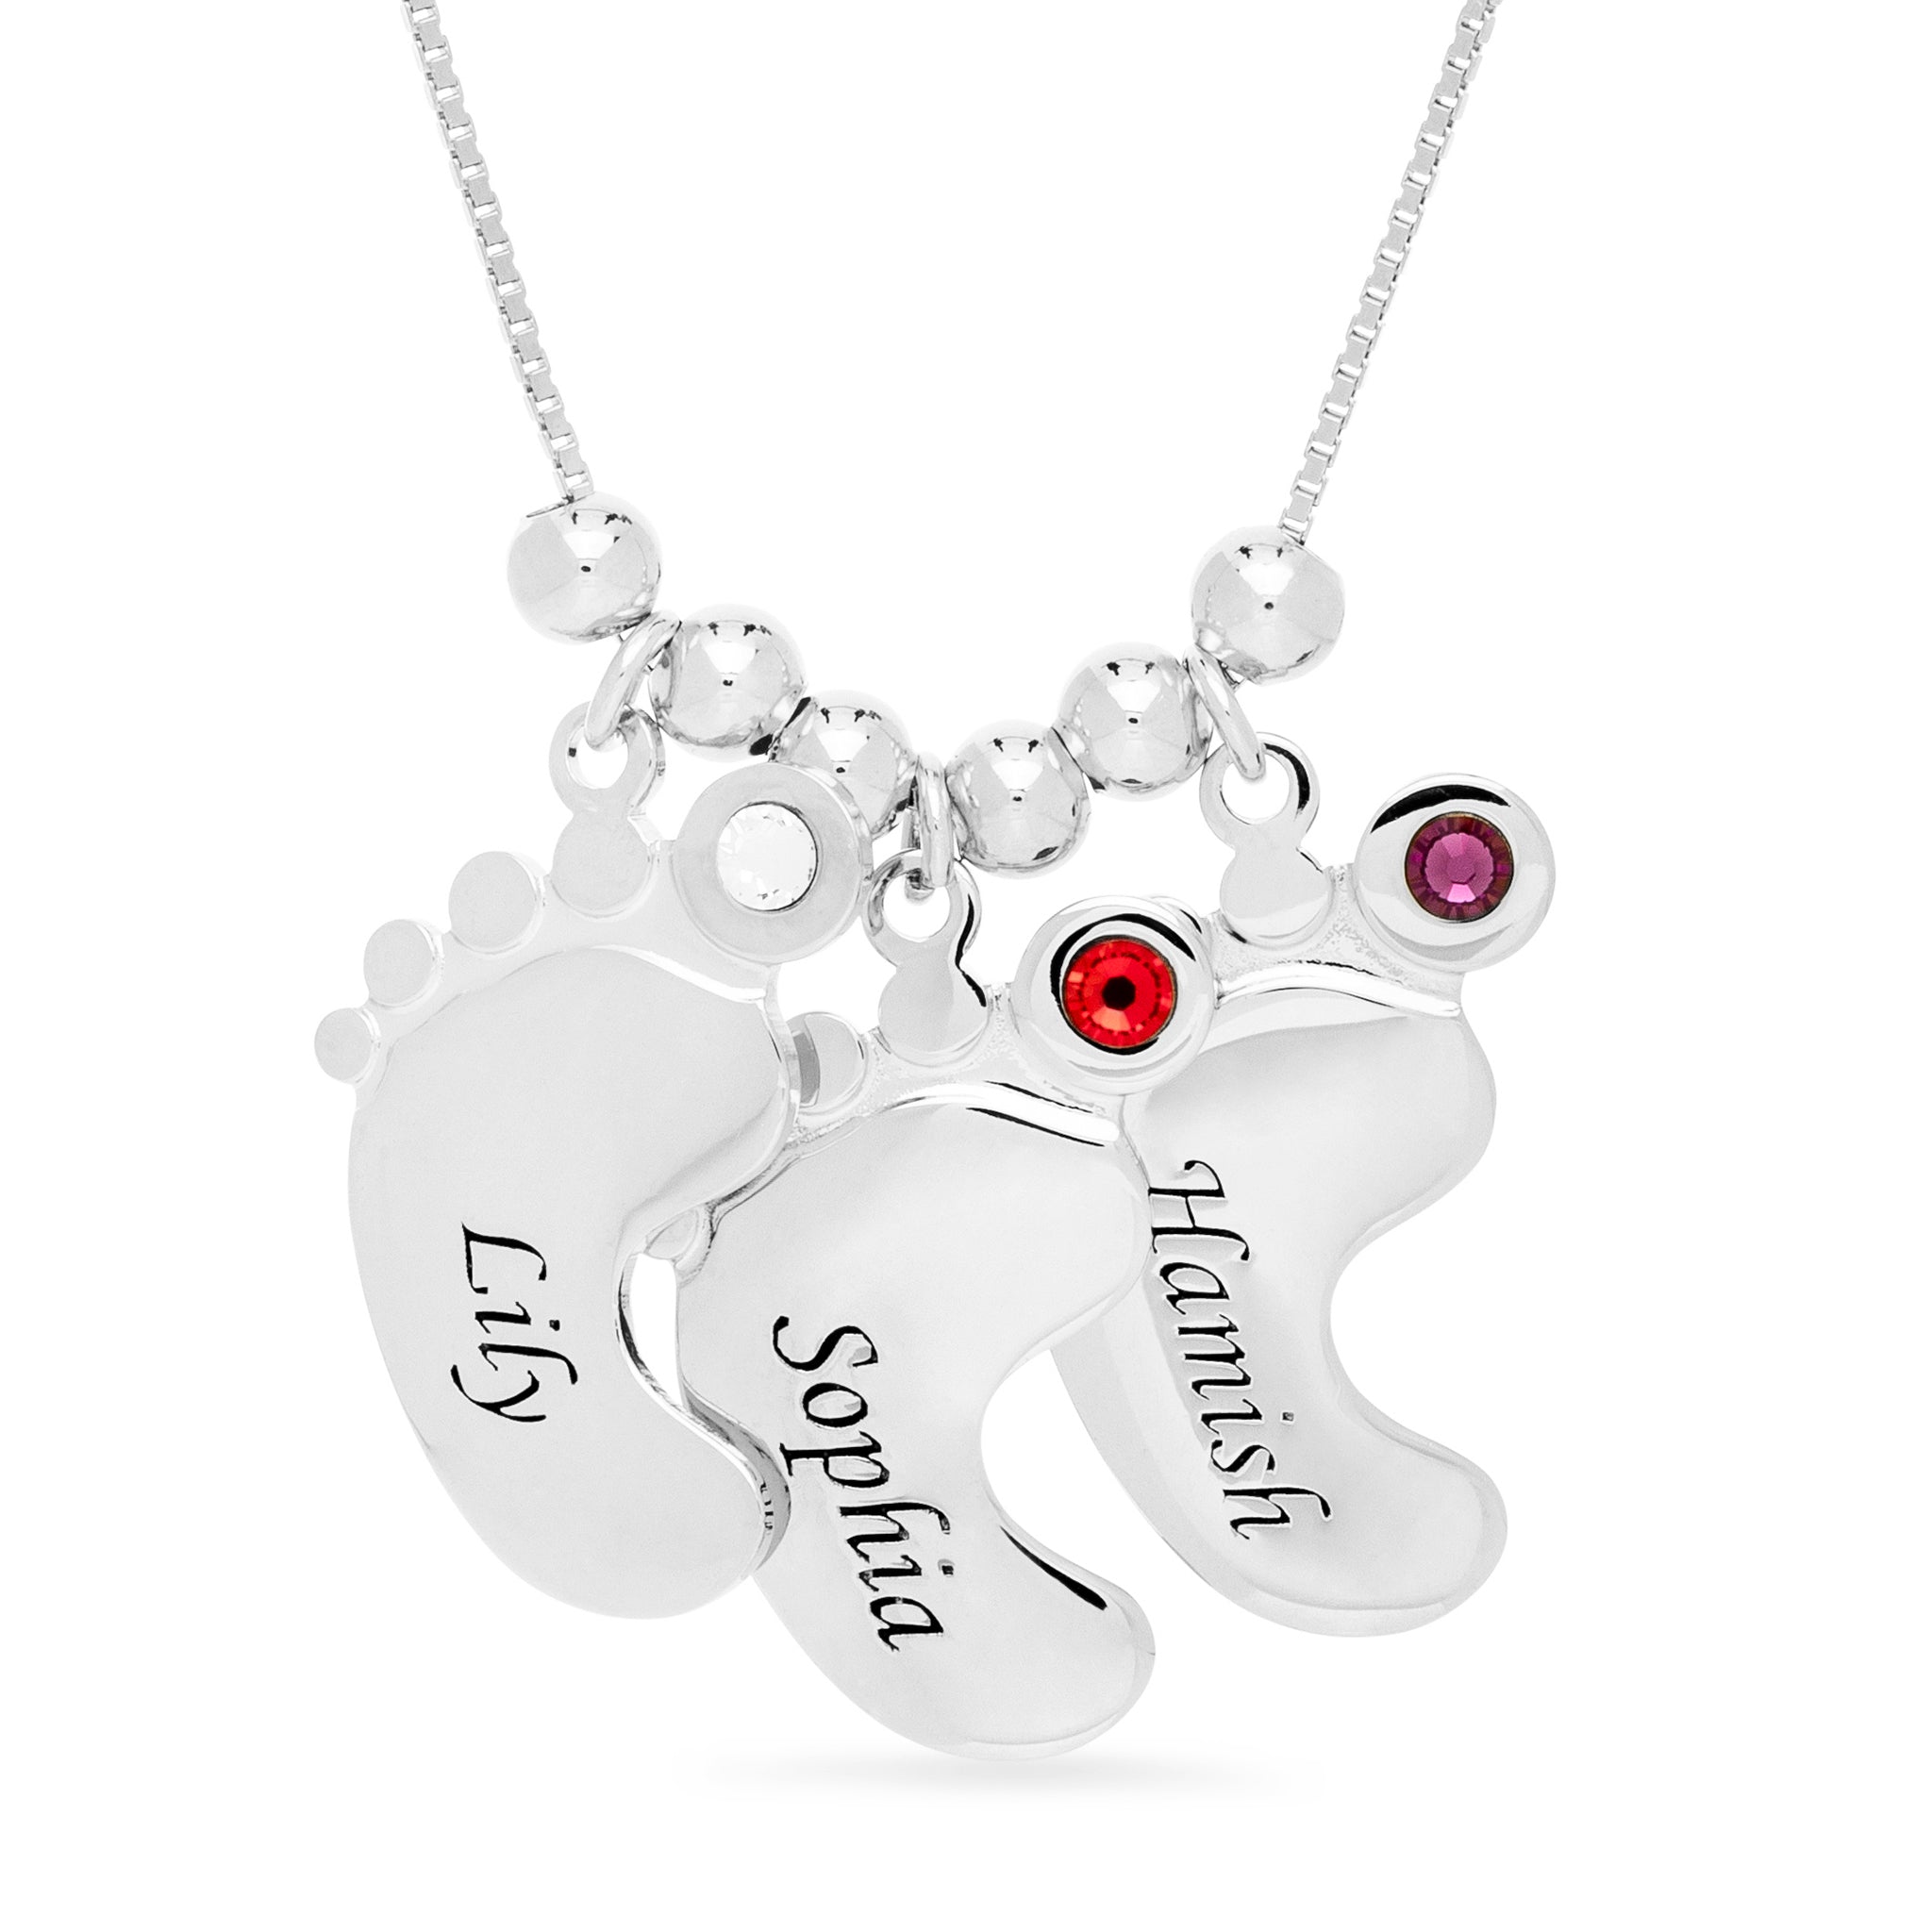 New Life Baby Feet Necklace